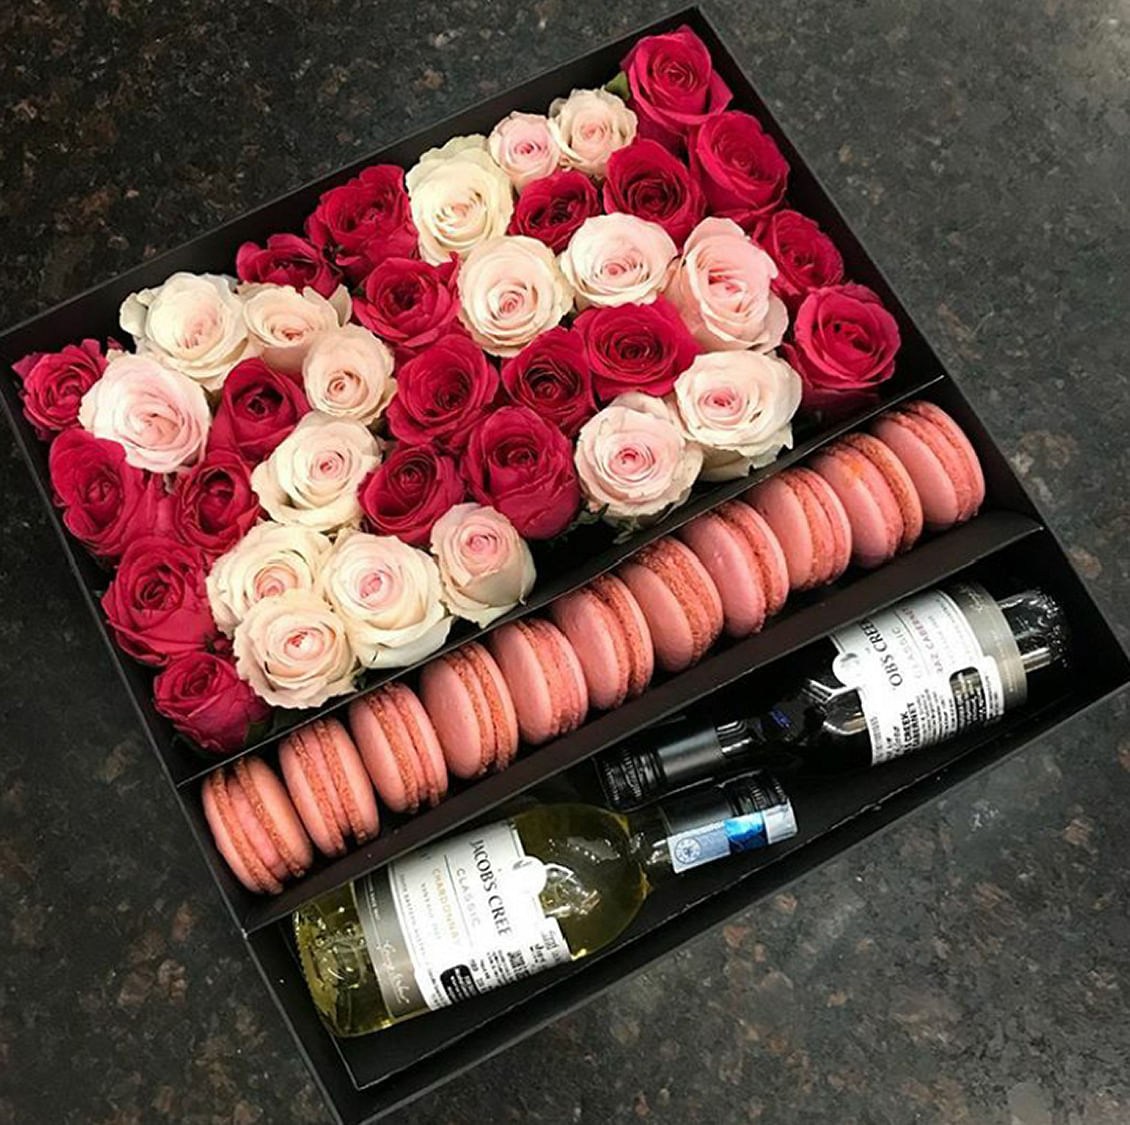 Start-up delivers roses in boxes